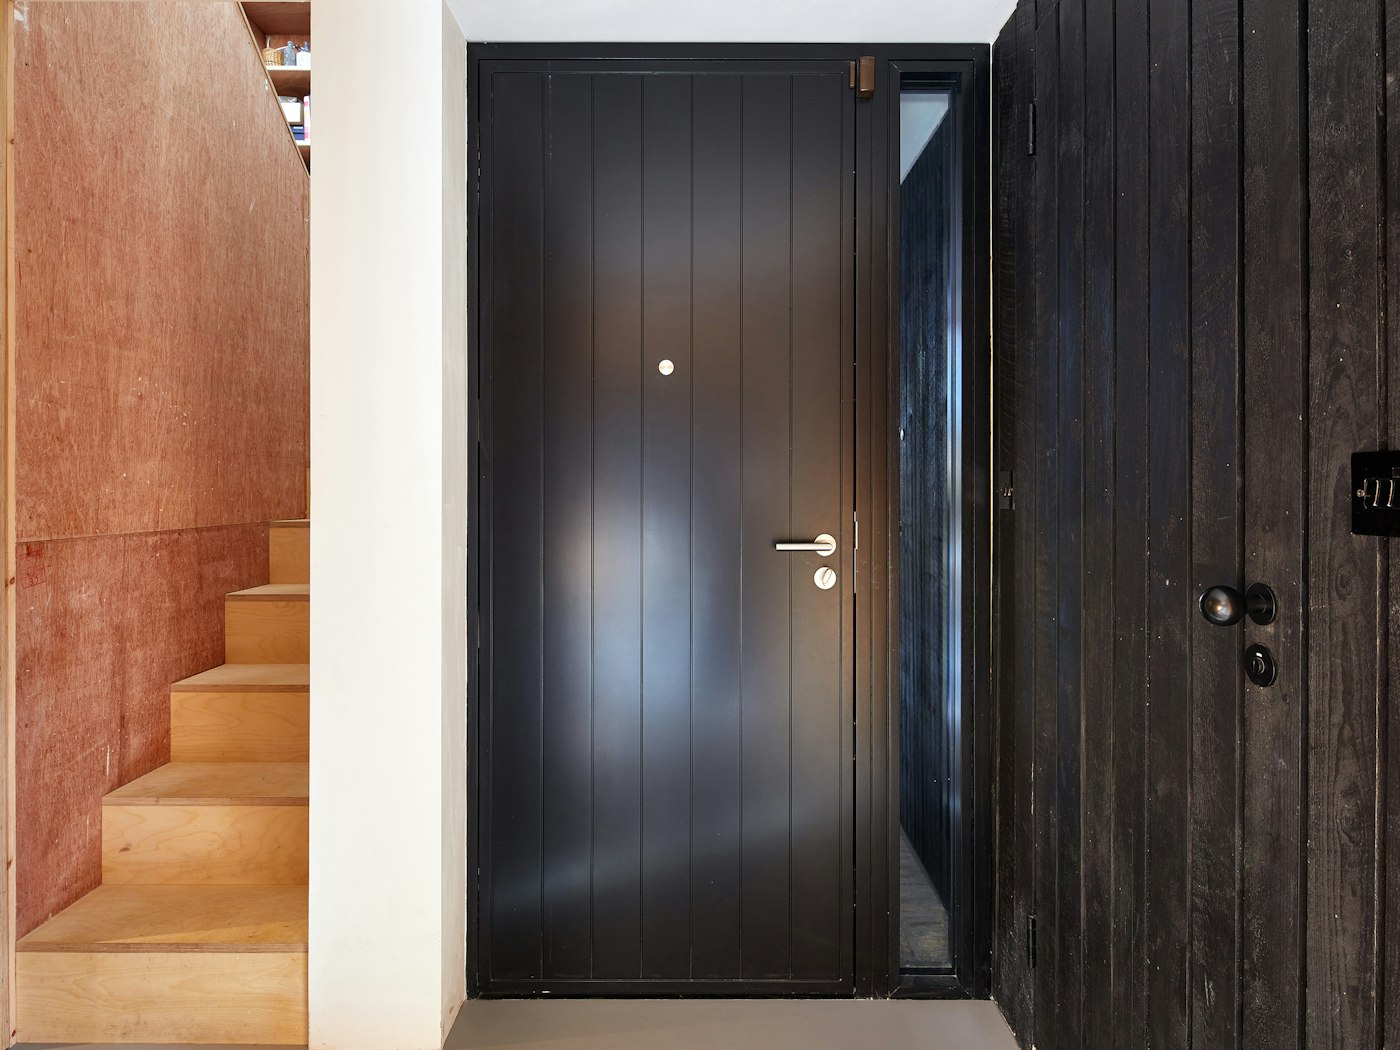 Urban Front's Porto passive front door next to the black cladded wall